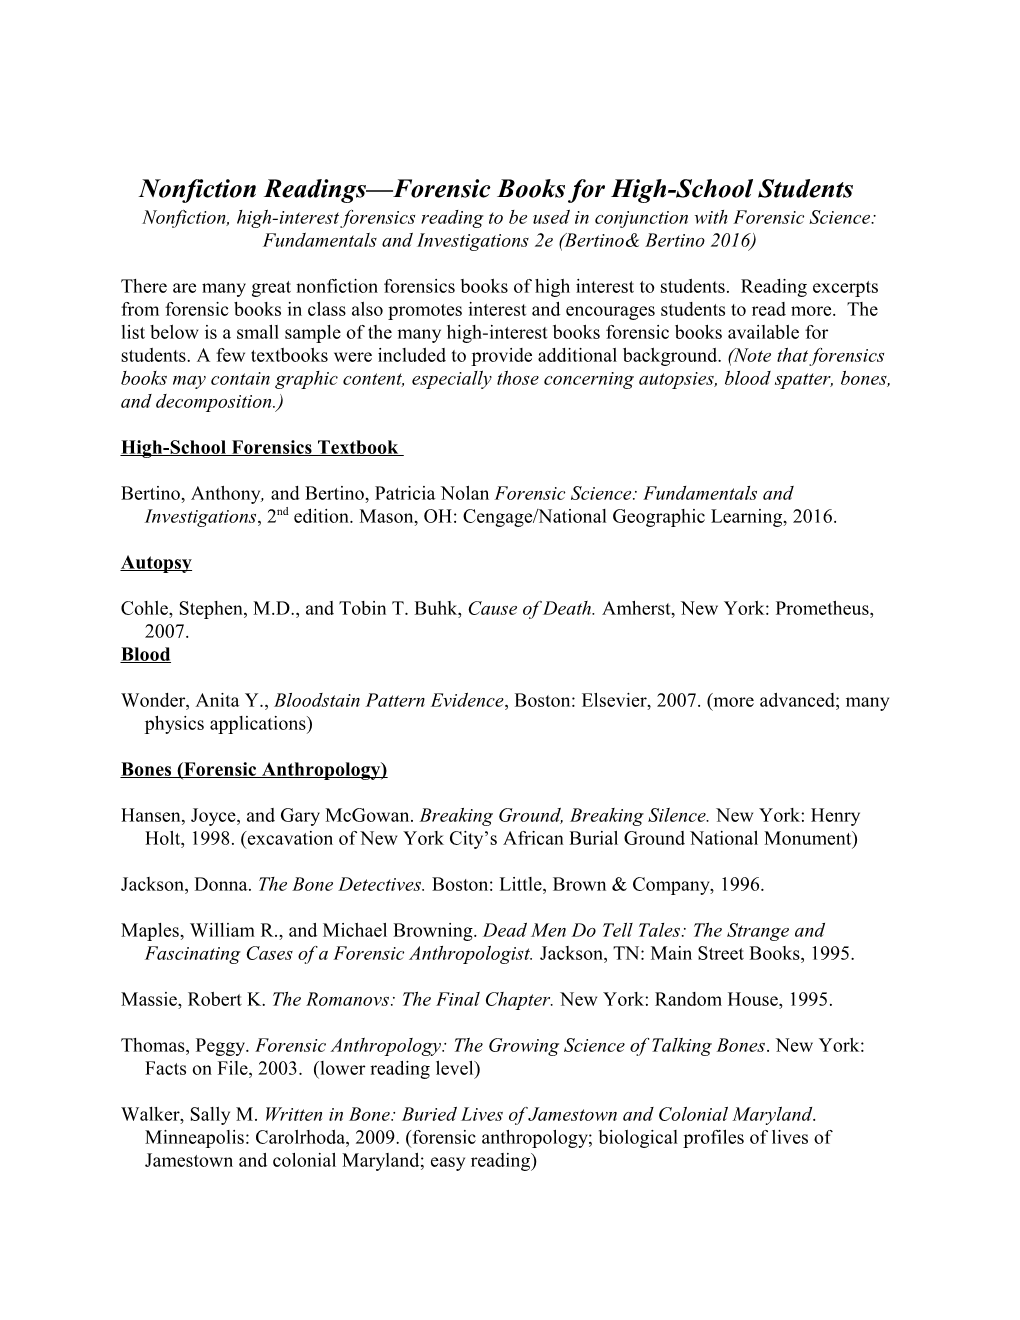 Nonfiction Readings Forensic Books for High-School Students